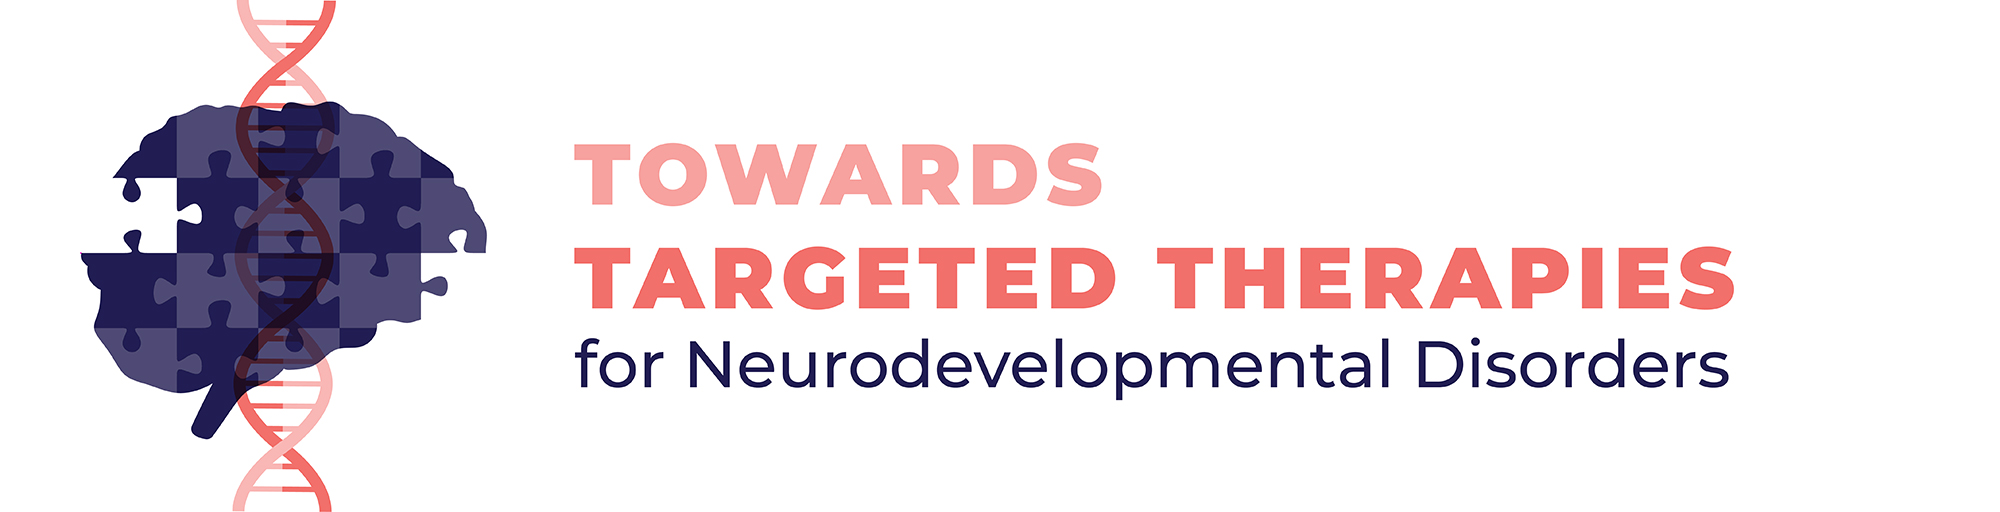 Towards Targeted Therapies for Neurodevelopmental Disorders